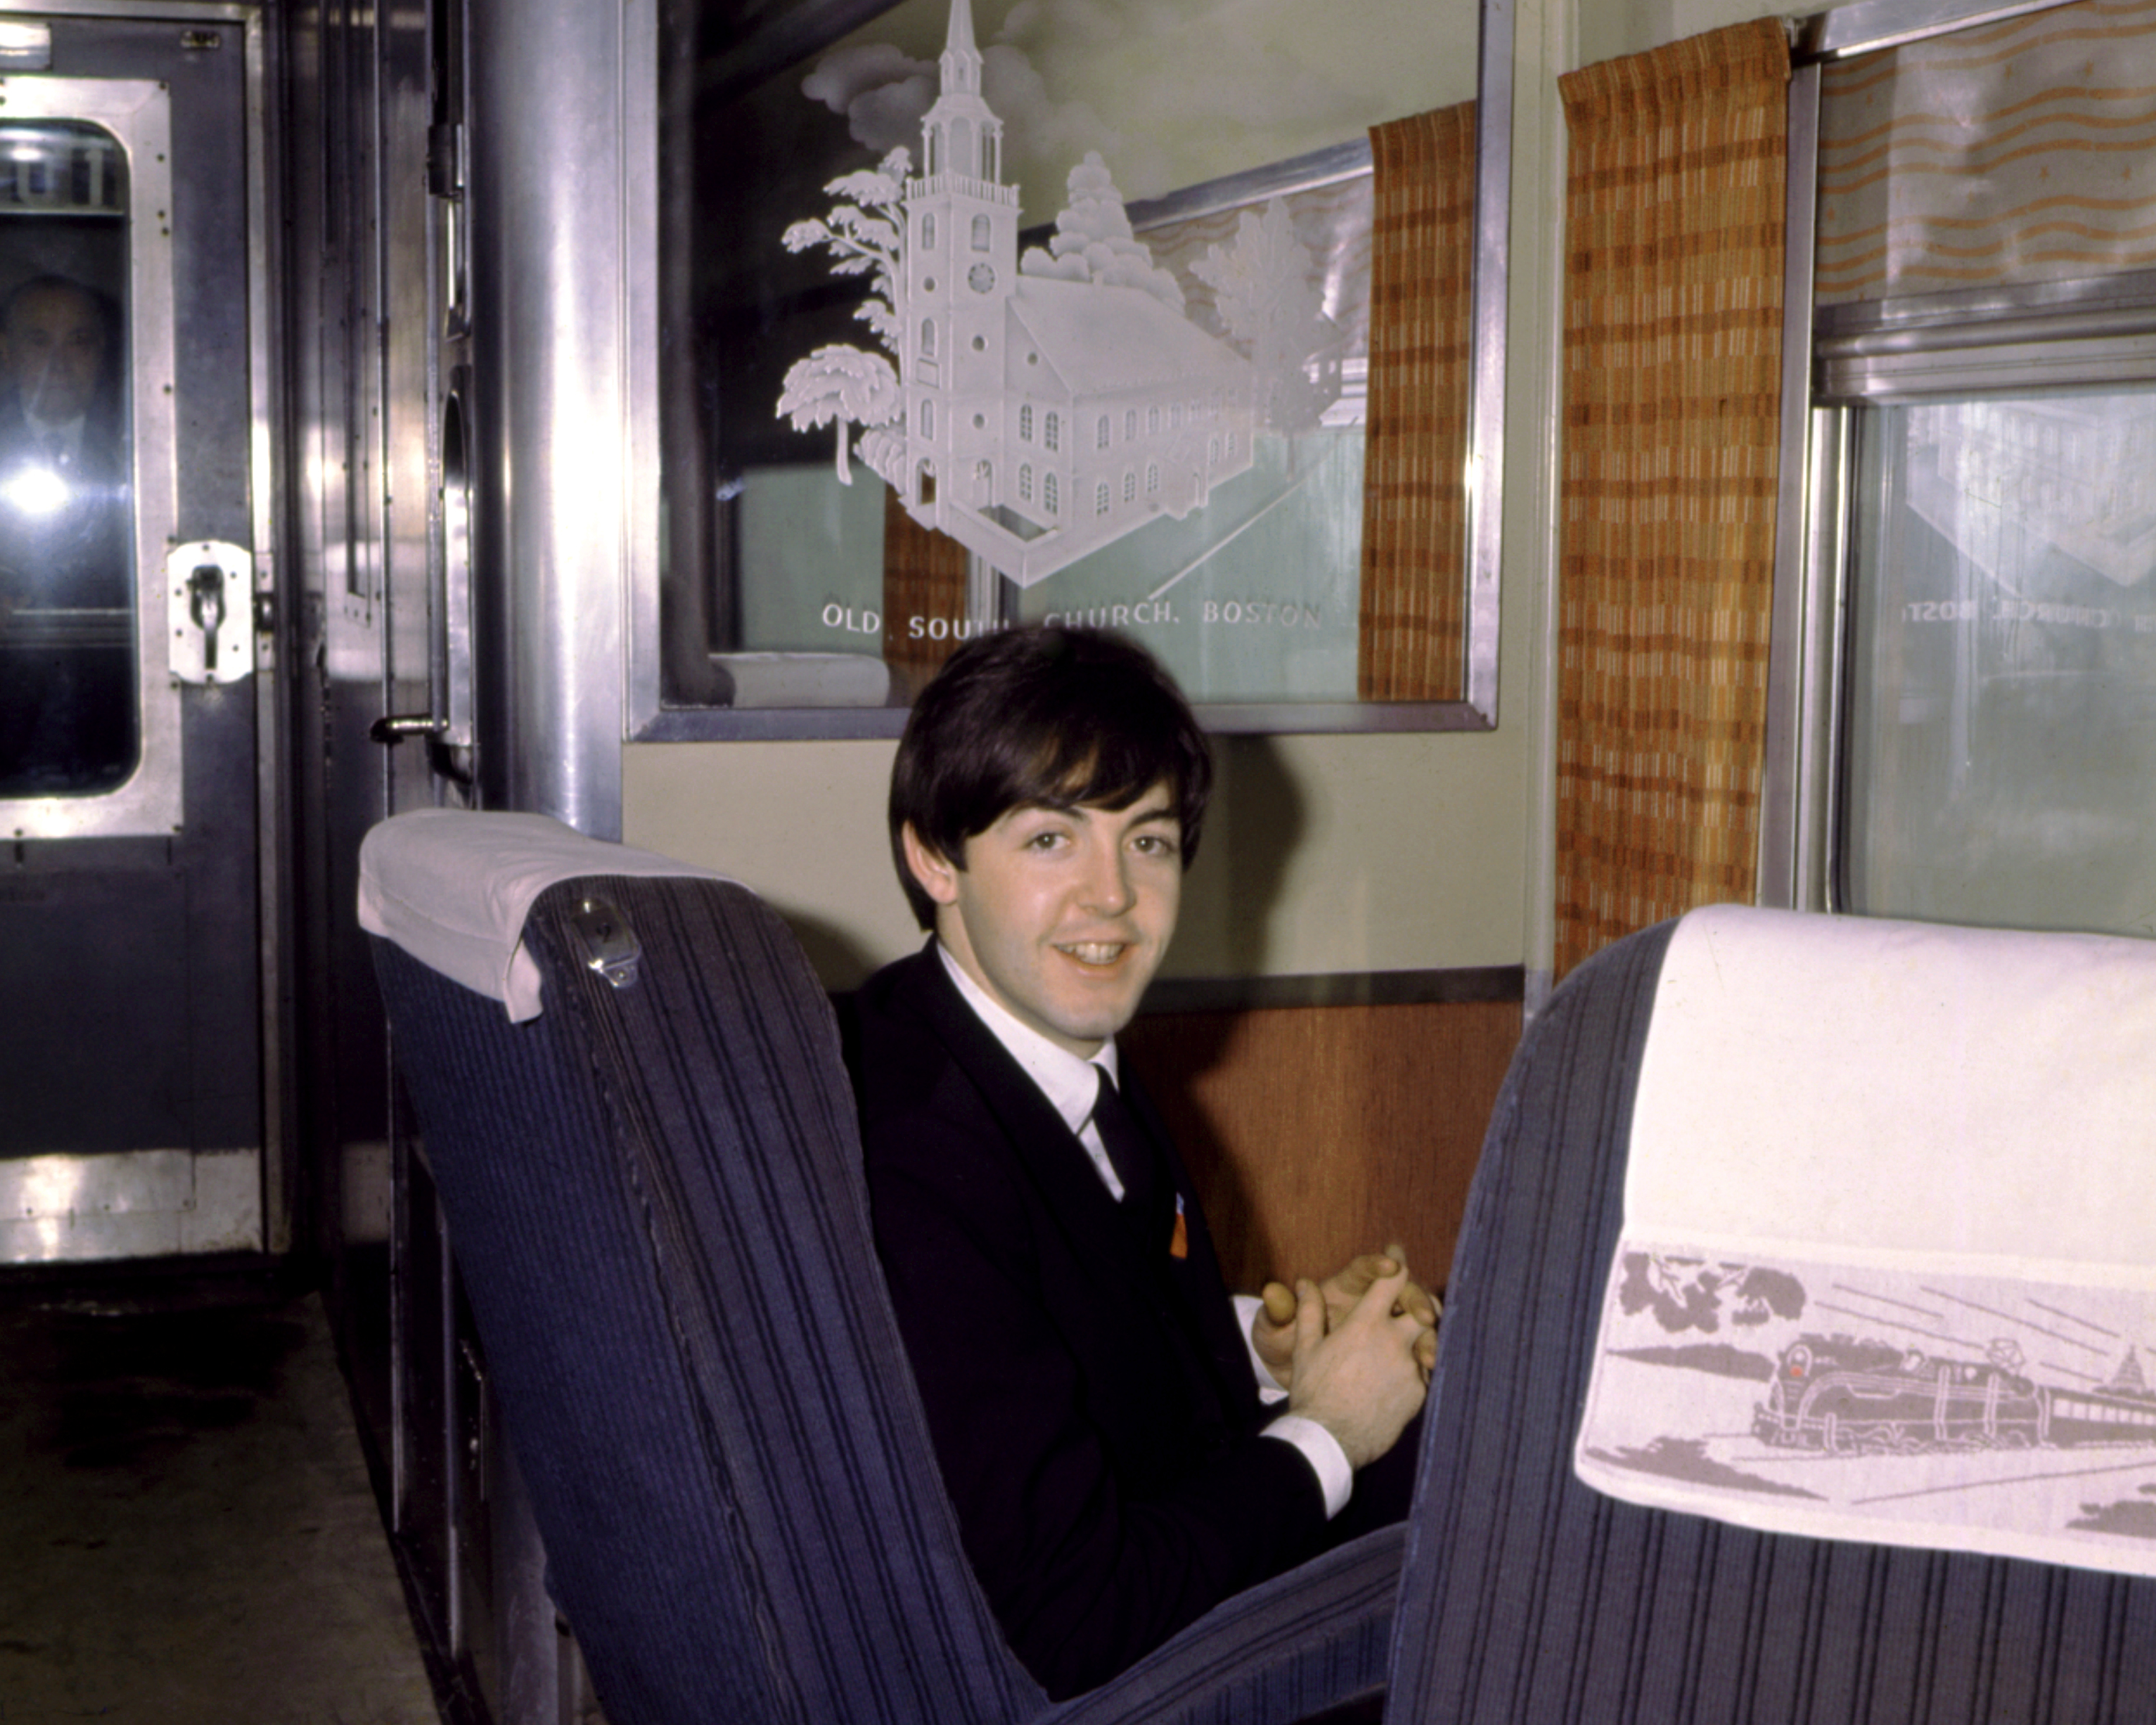 Paul McCartney of the rock band "The Beatles" poses for a portrait sitting on a train in Boston, Massachusetts in 1964. | Source: Getty Images